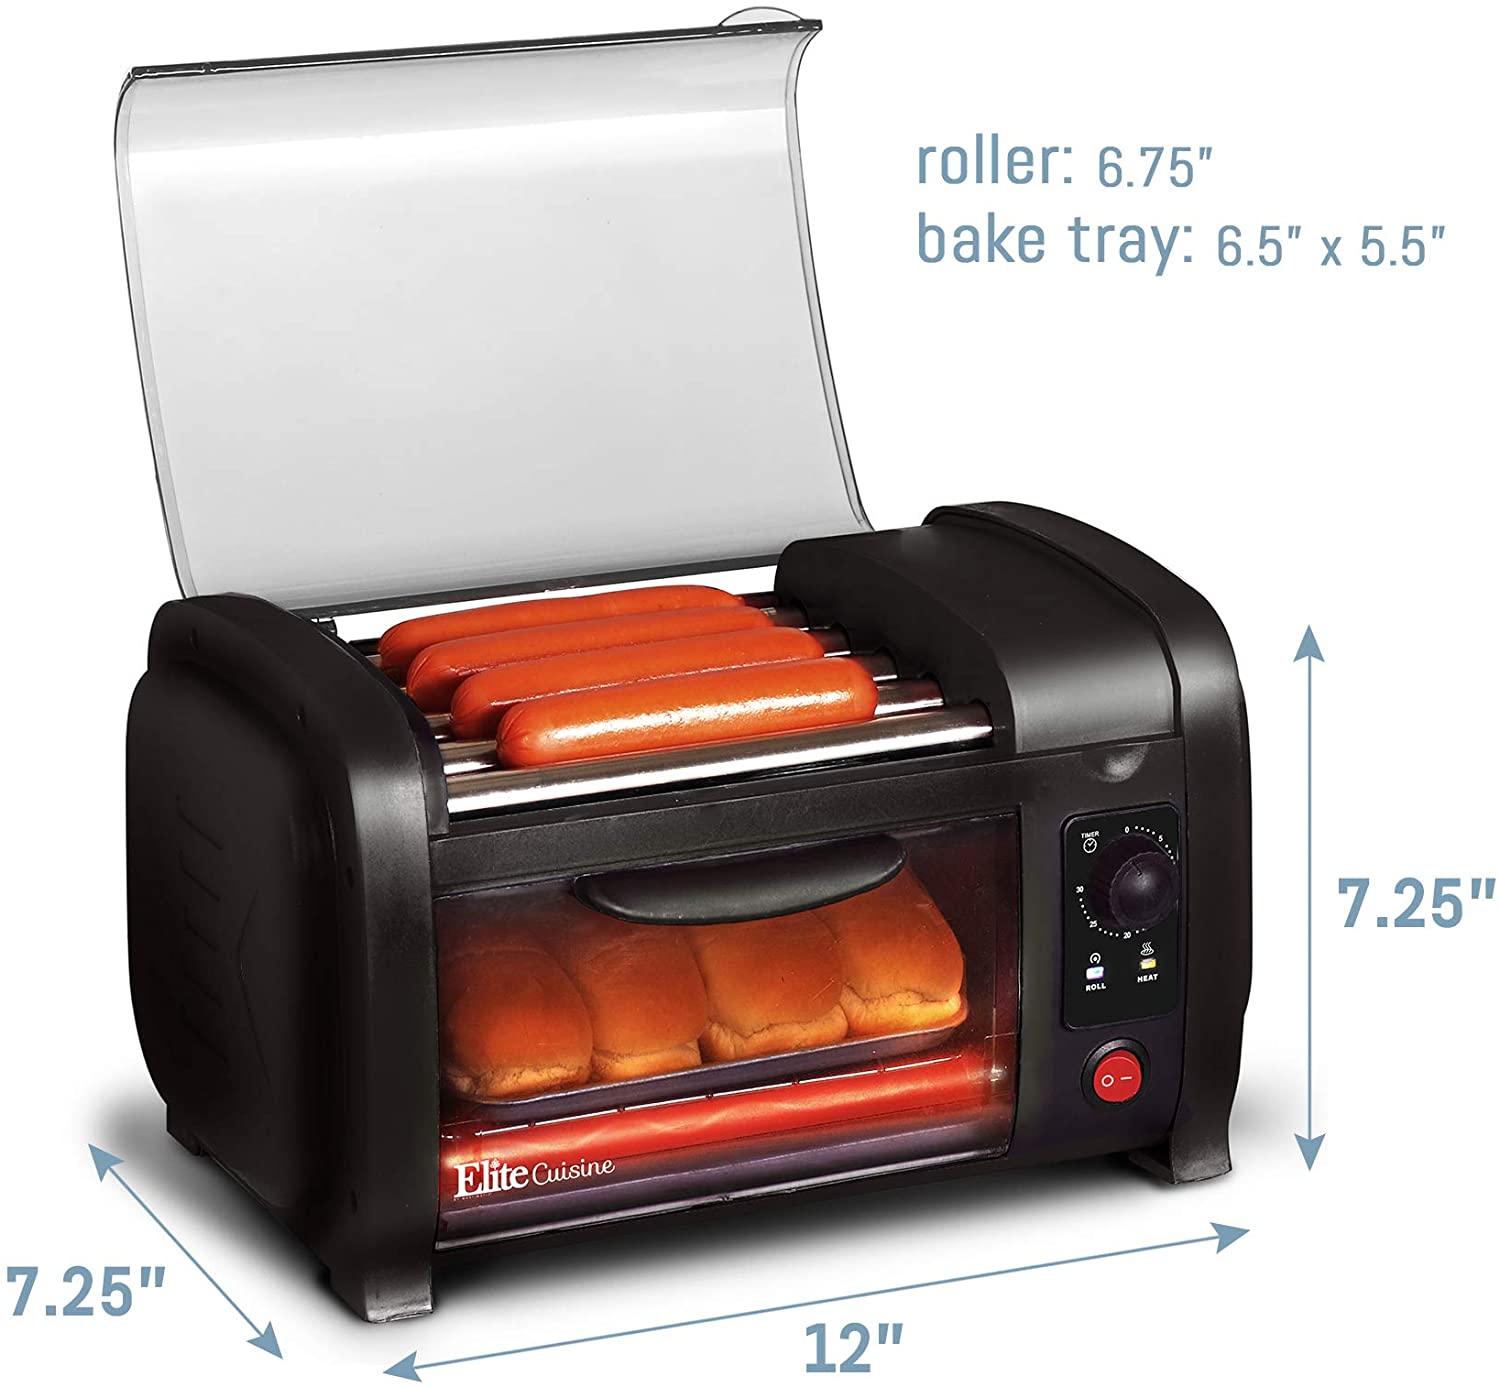 Elite Gourmet EHD-051B New Cuisine  Hot Dog Roller and Toaster Oven, Black - image 2 of 6